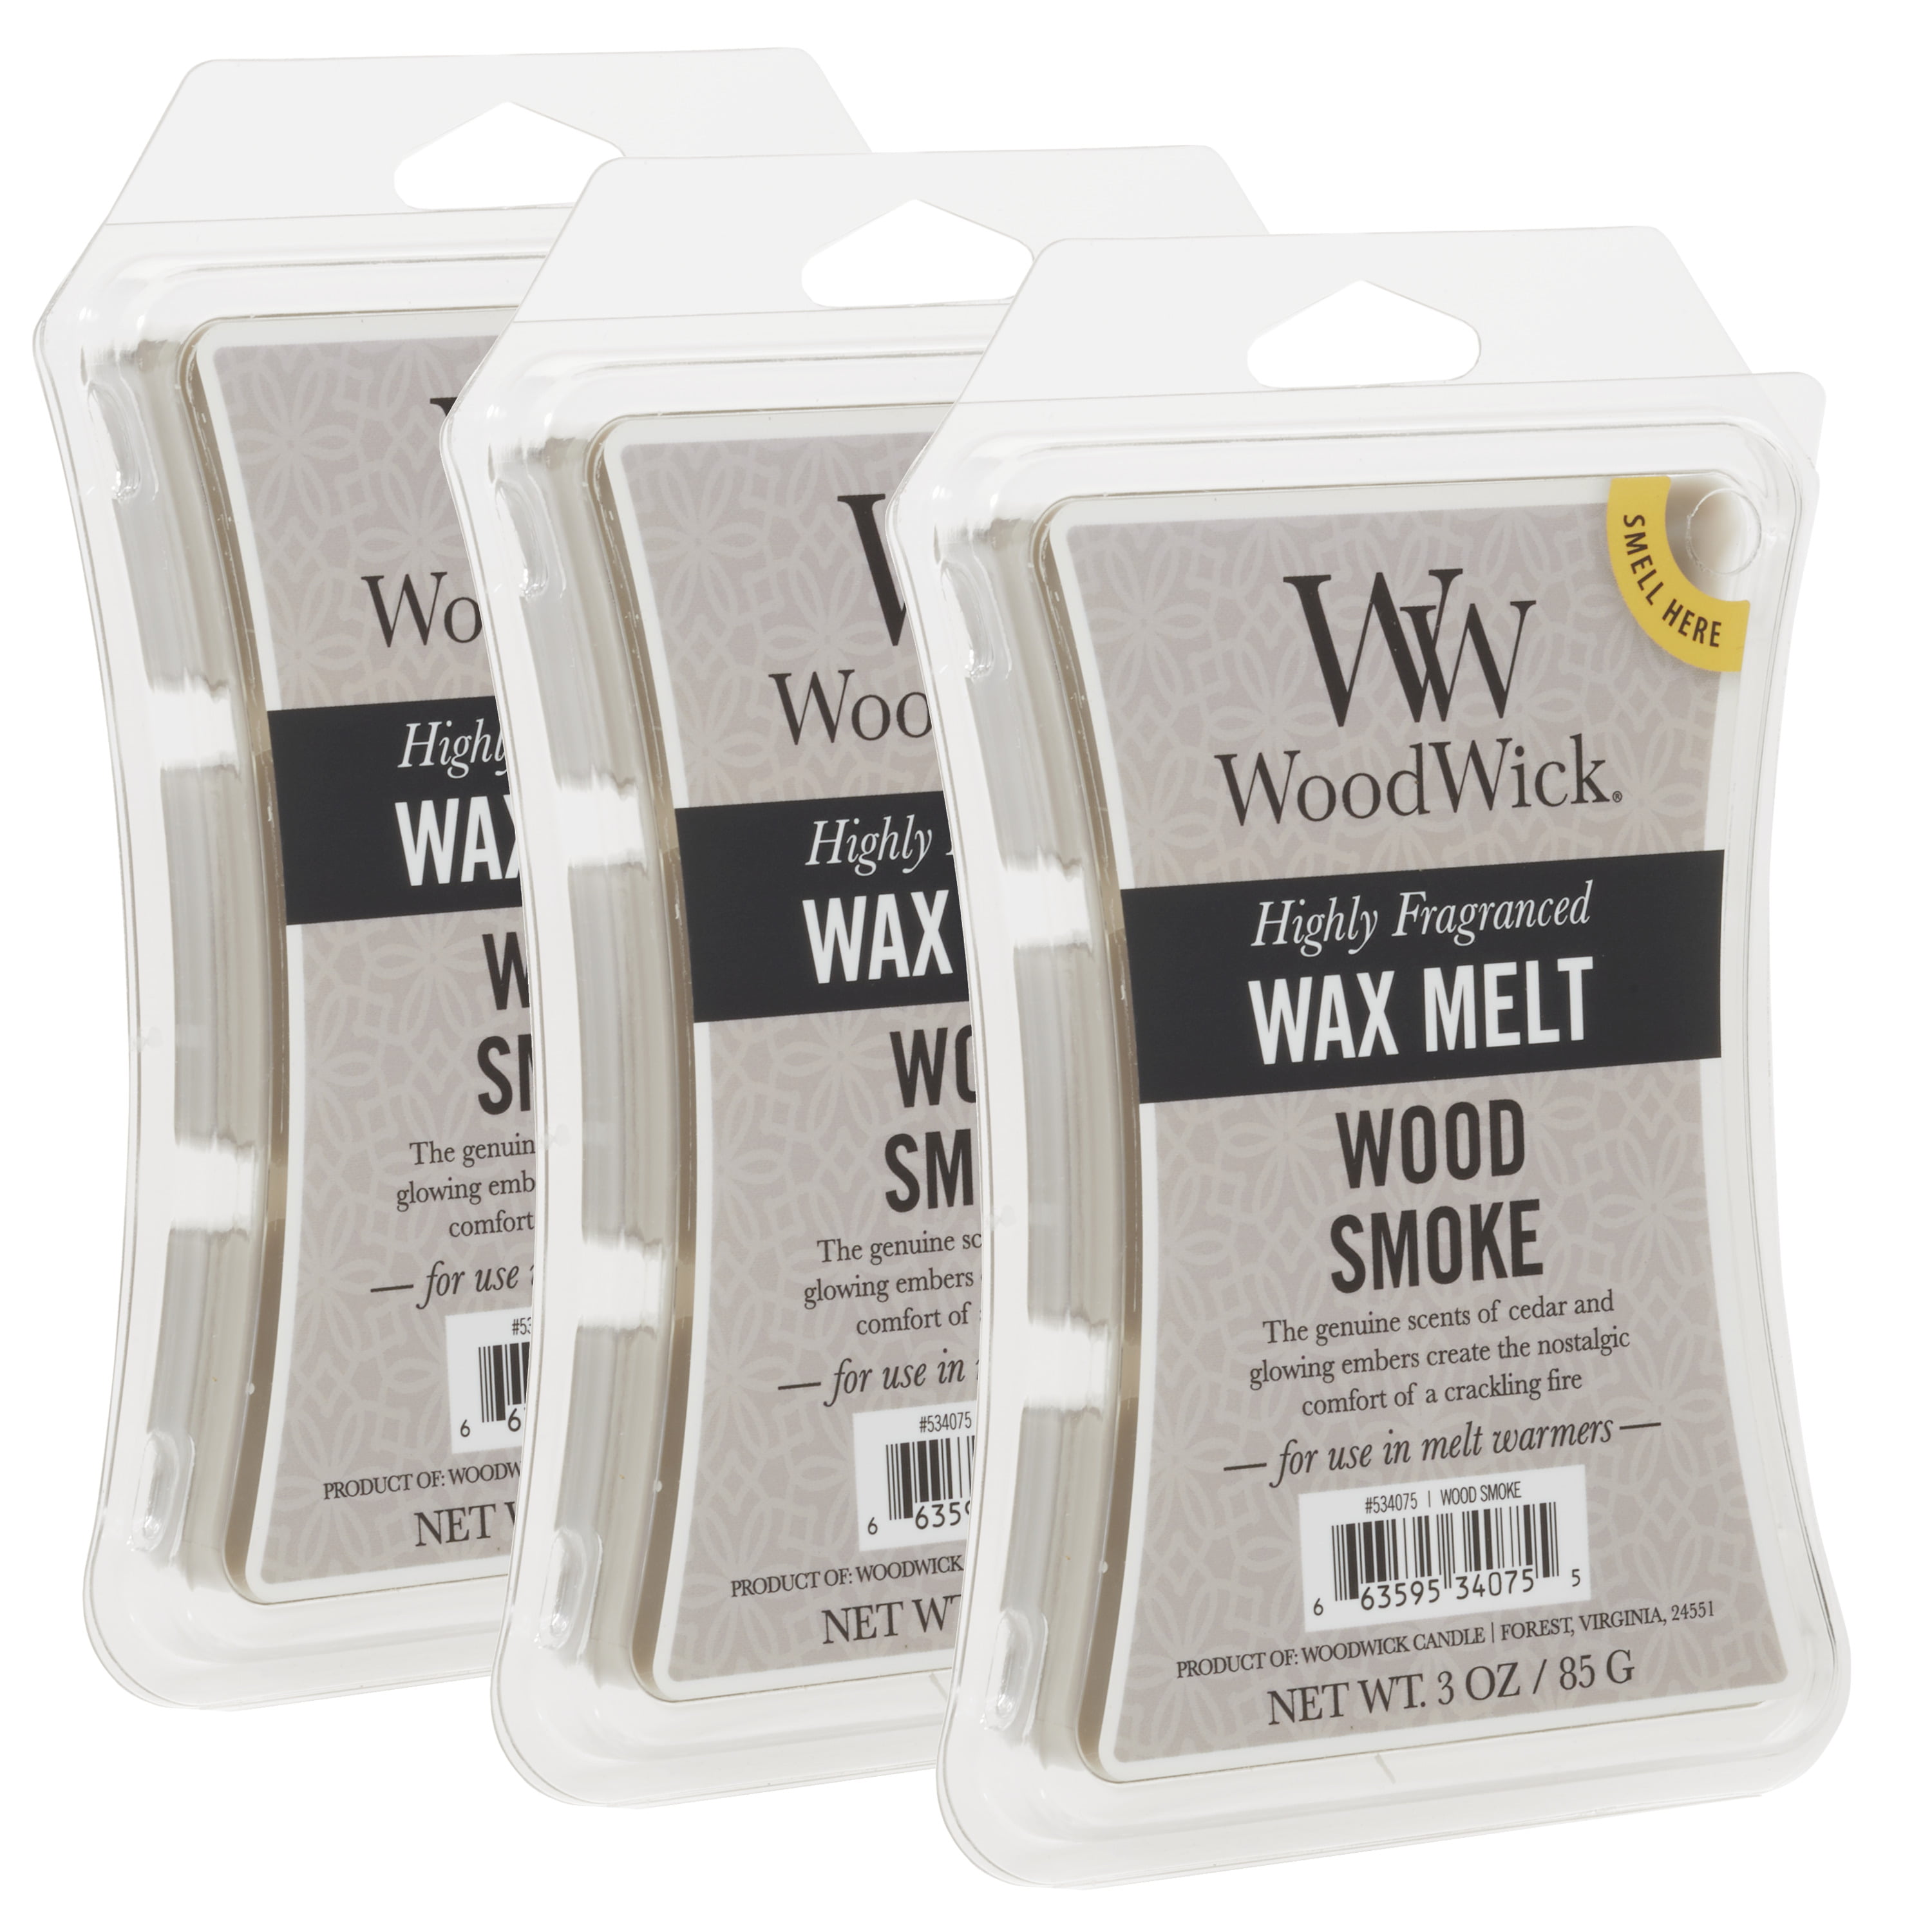 WoodWick highly fragranced Wax Melts Cinnamon Chai FALL AUTUMN SCENTS 3oz pack 